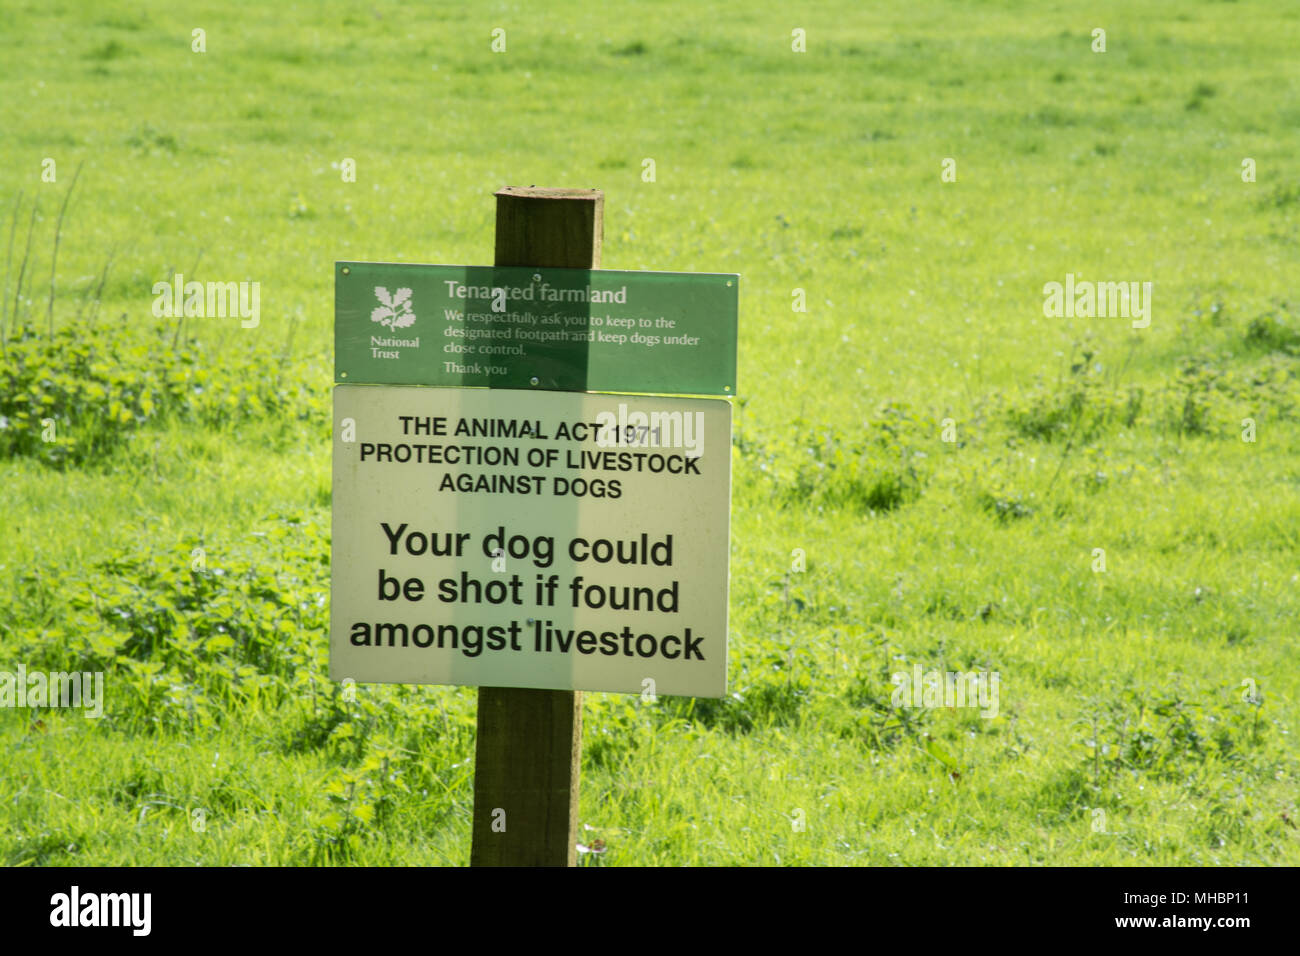 Sign in field stating The animal act 1971 protection of livestock against dogs - Your dog could be shot if found amongst livestock Stock Photo